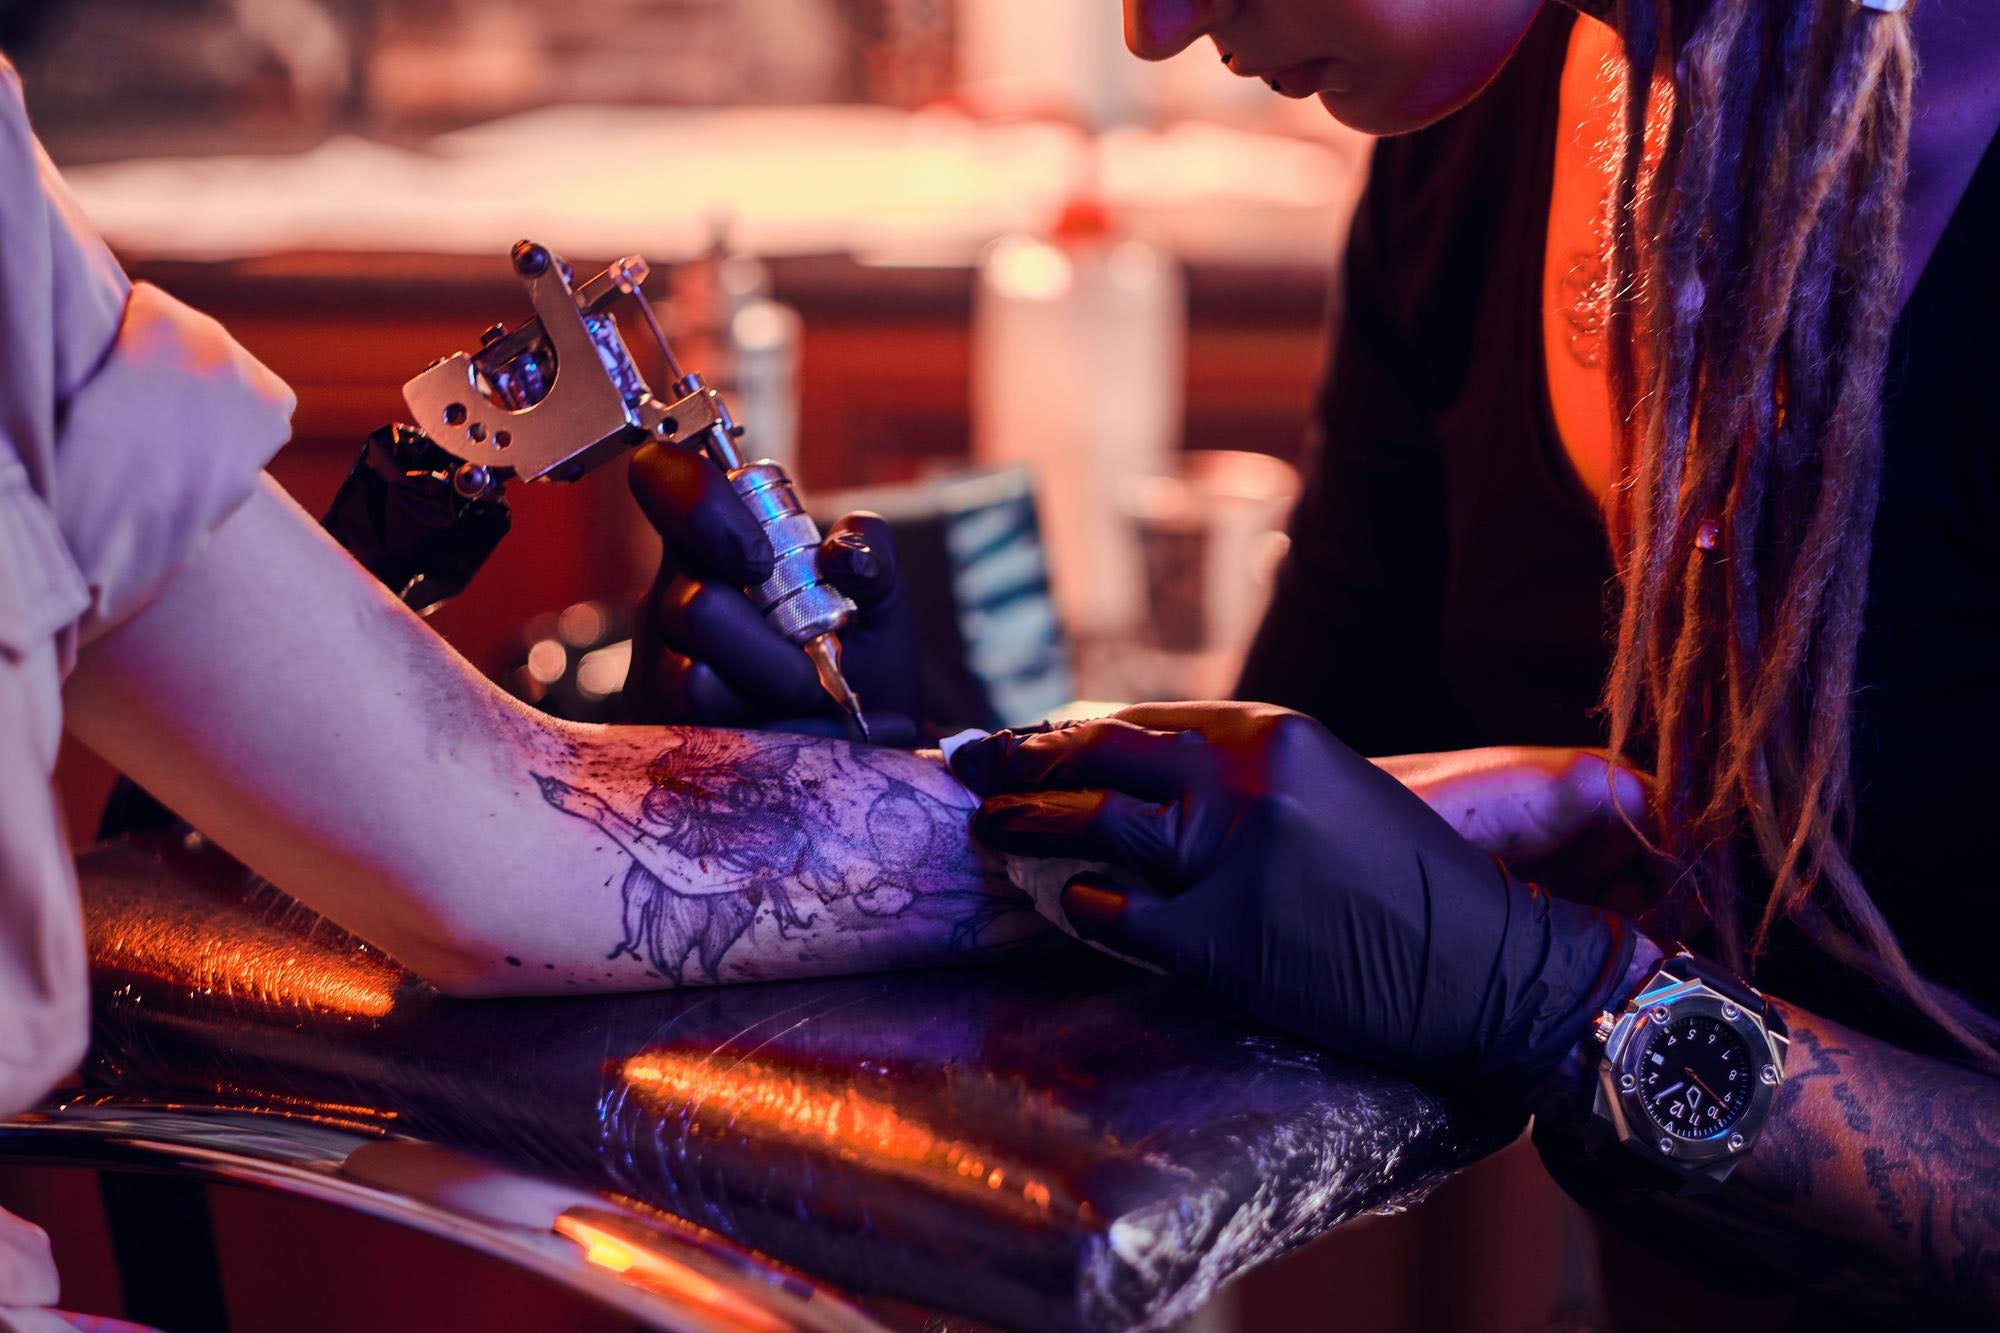 Tattoo artist wearing black gloves tattooing a client's forearm